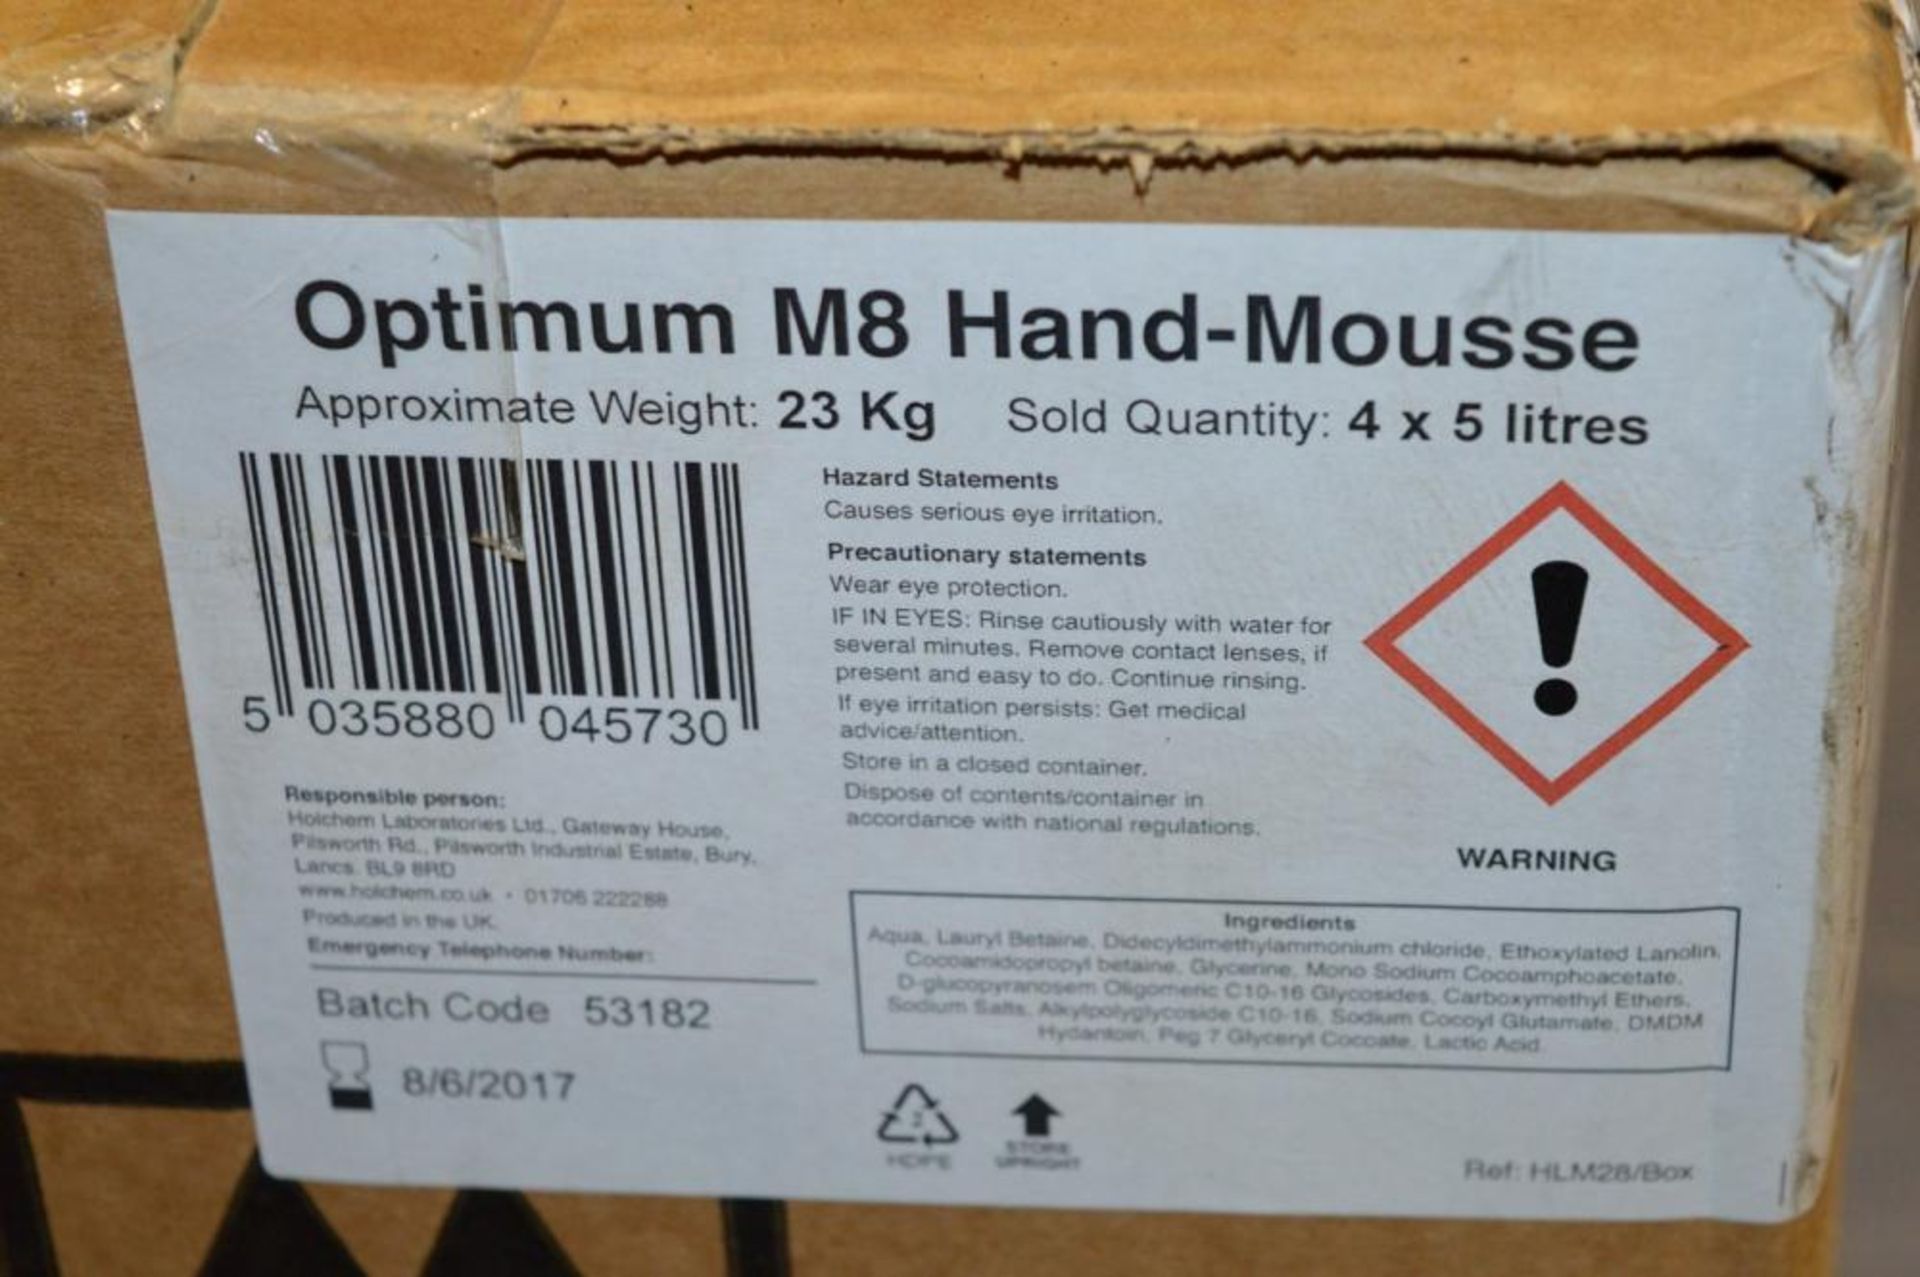 4 x 5 Litre Optimum M8 Hand Mousse - New Boxed Stock - CL282 - Ref MS120 - Location: Altrincham WA14 - Image 2 of 3